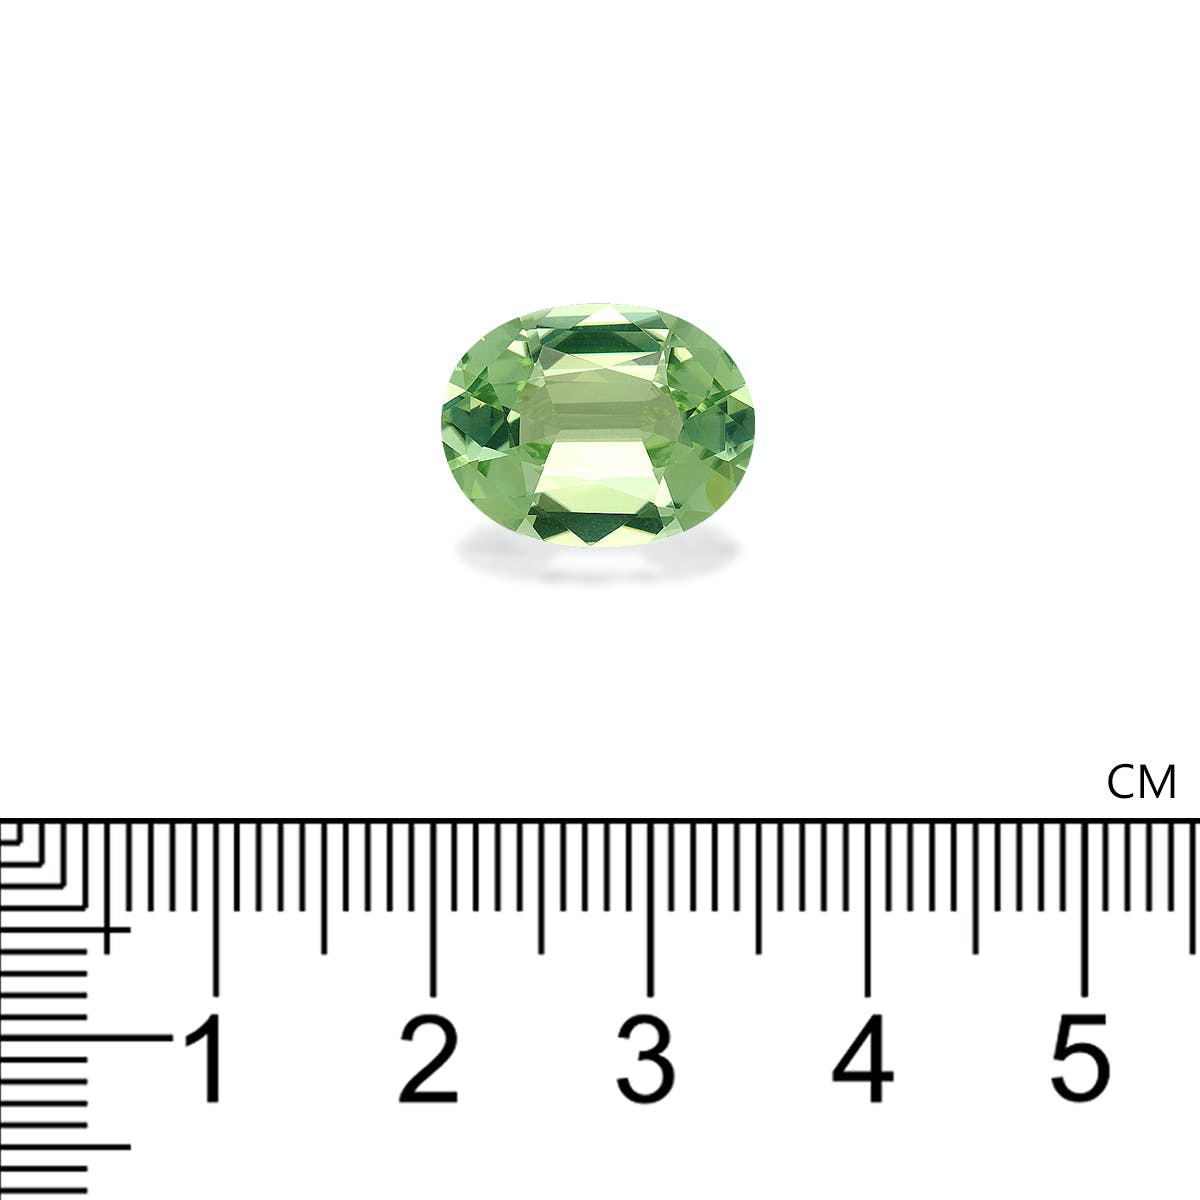 Picture of Lime Green Tourmaline 6.72ct (TG1167)